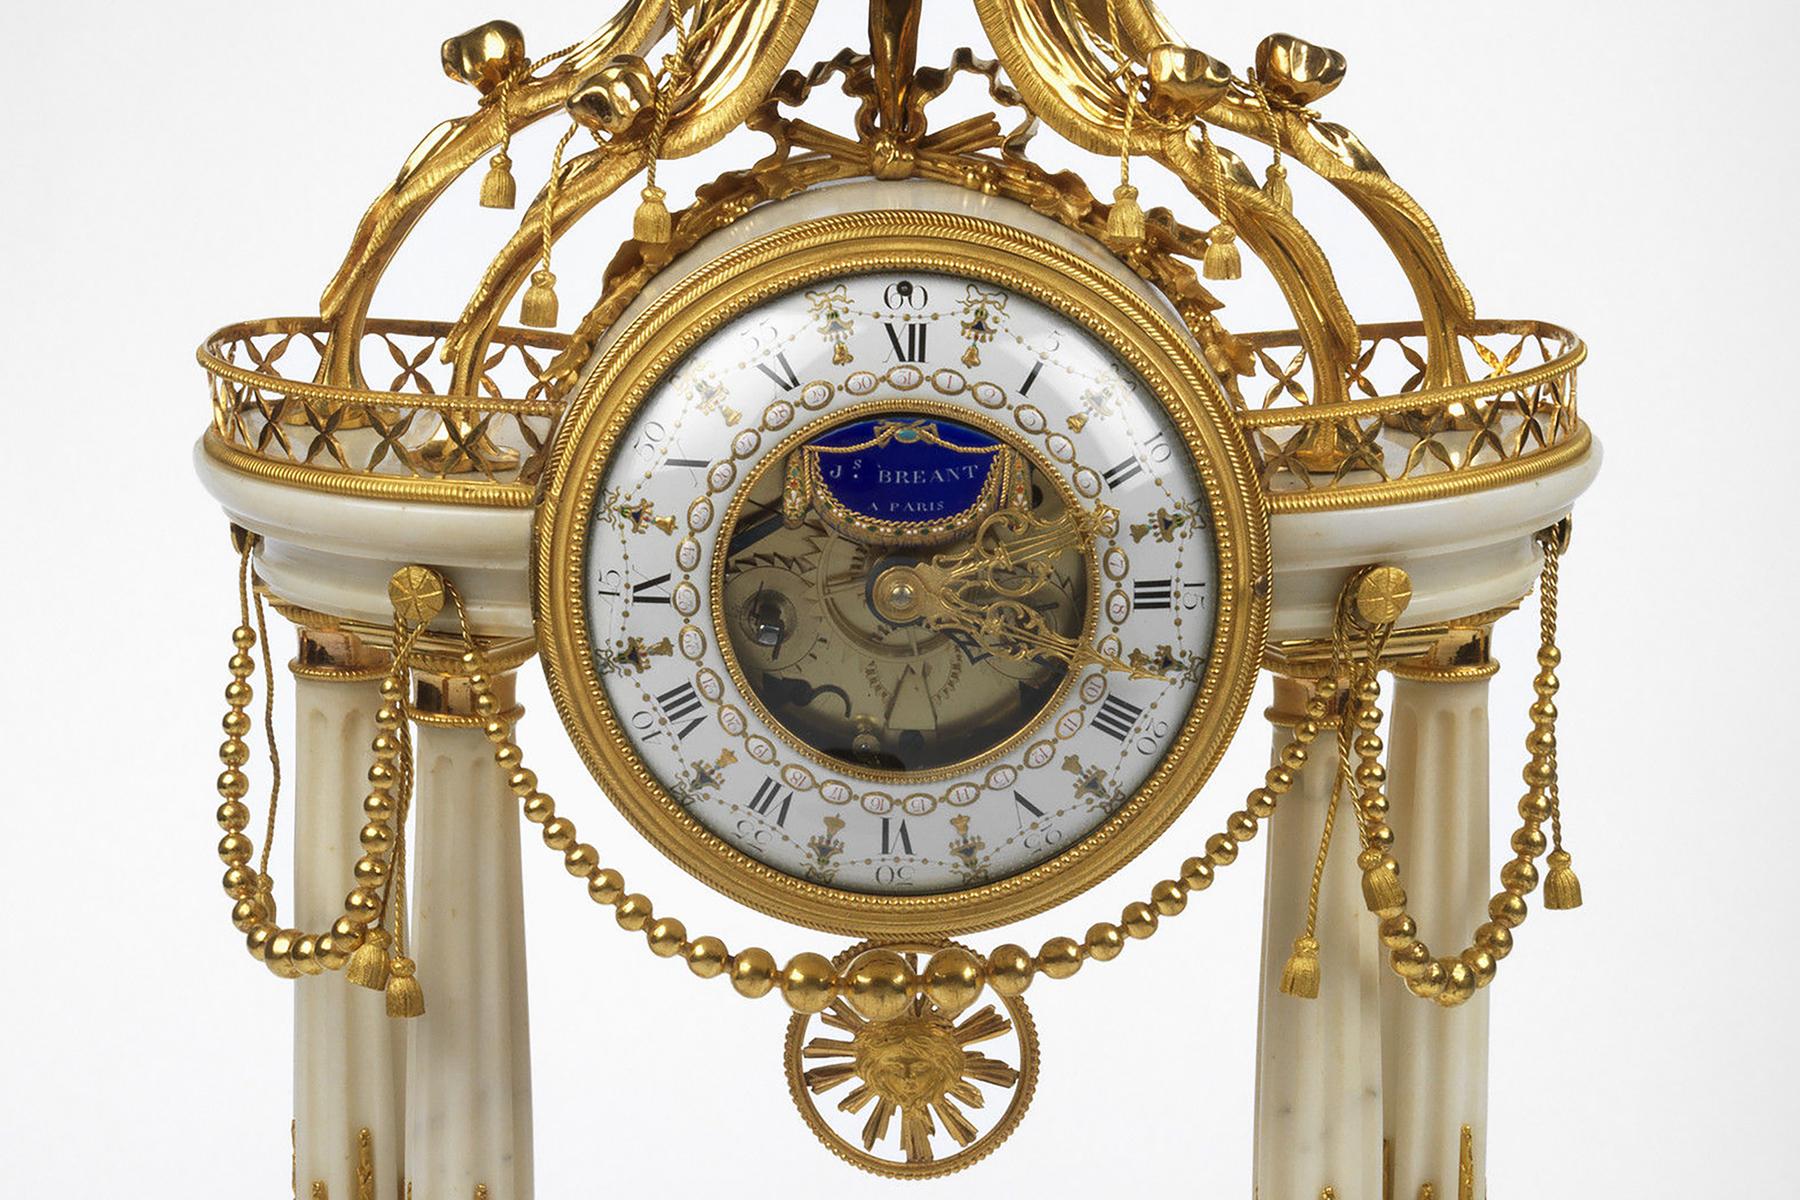 The circular enamel dial is signed Coteau and J S Breant/à Paris on a blue enamel plaque, suspended above the hands of the dial. This has black Roman numerals indicating the hours and small black numerals indicating the days of the month. It has a